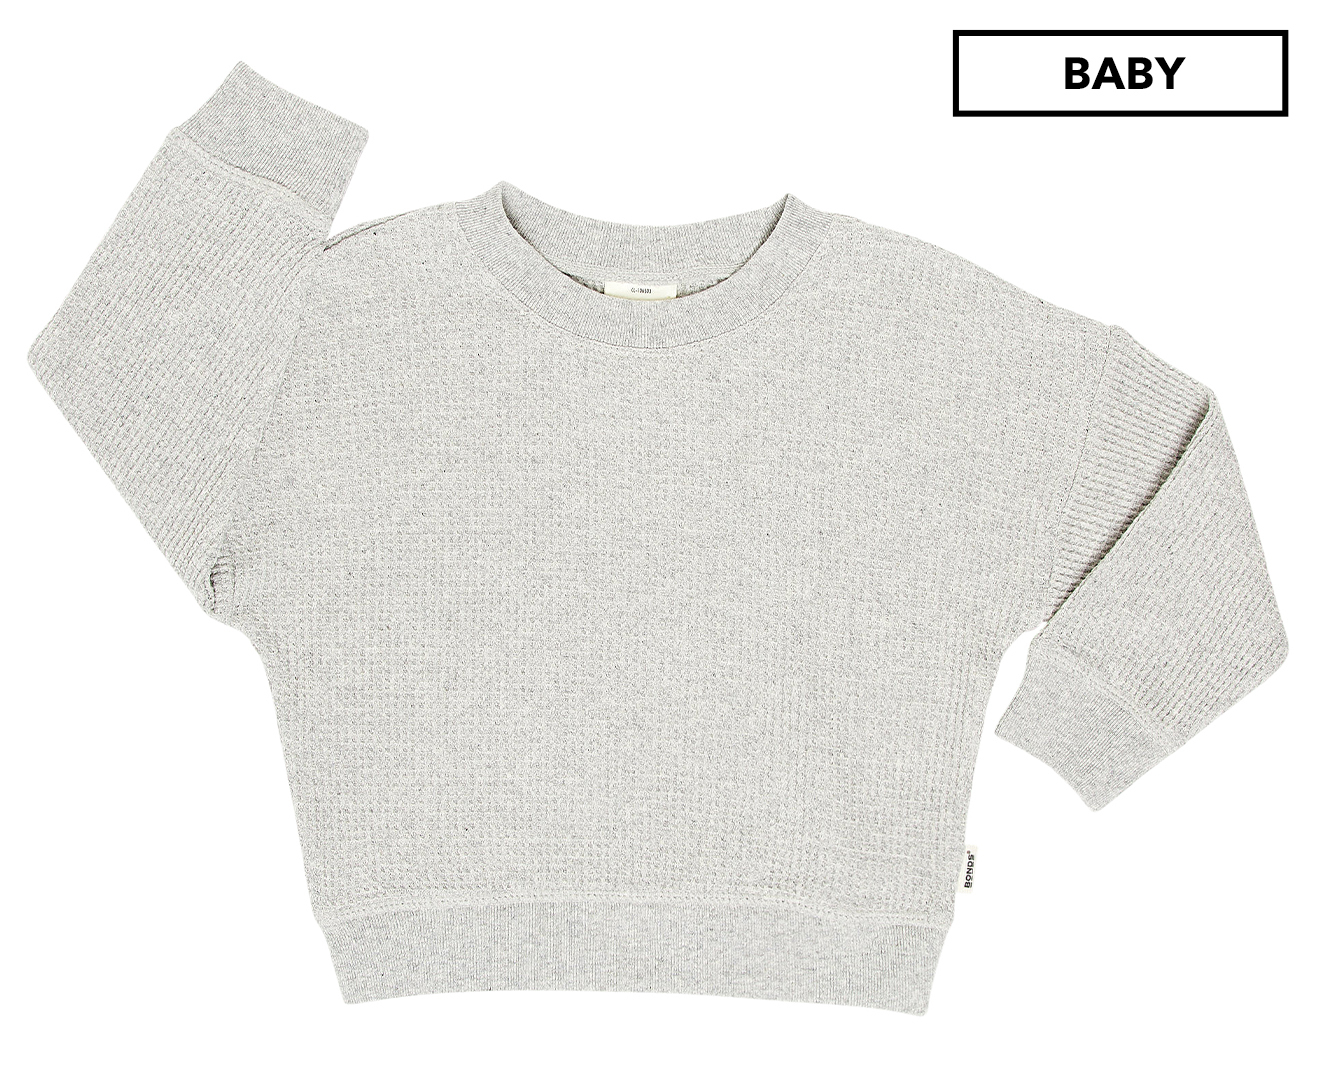 Bonds Bonds Baby Stretchies Long Sleeve Top Tee size 000 Colour Grey Marle 